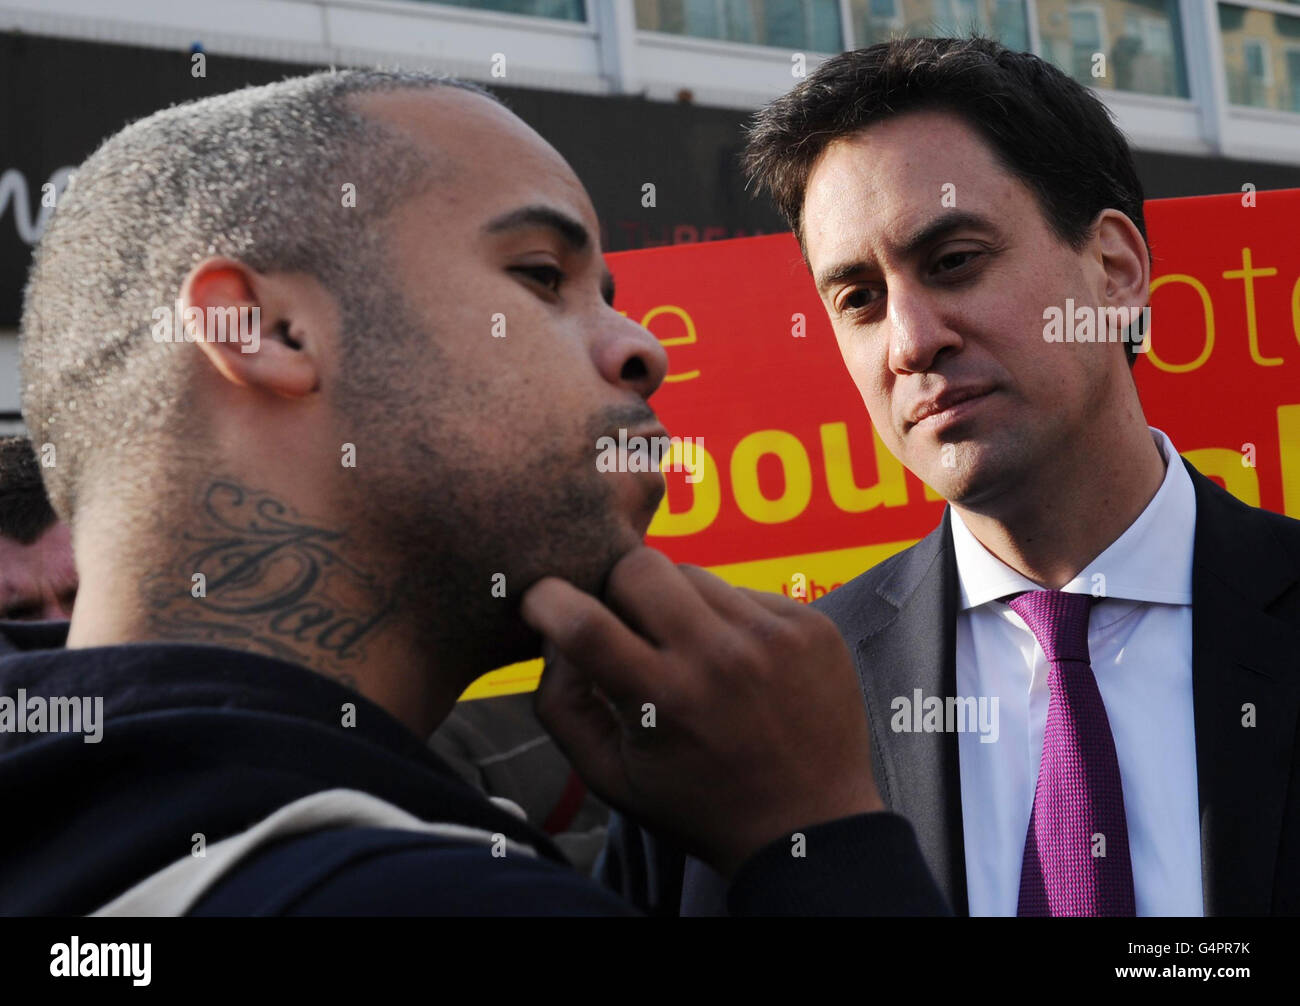 Labour leader Ed Miliband speaks to a member of the public (name not given) in Feltham as he campaigns ahead of next weeks Feltham and Heston by-election. Stock Photo